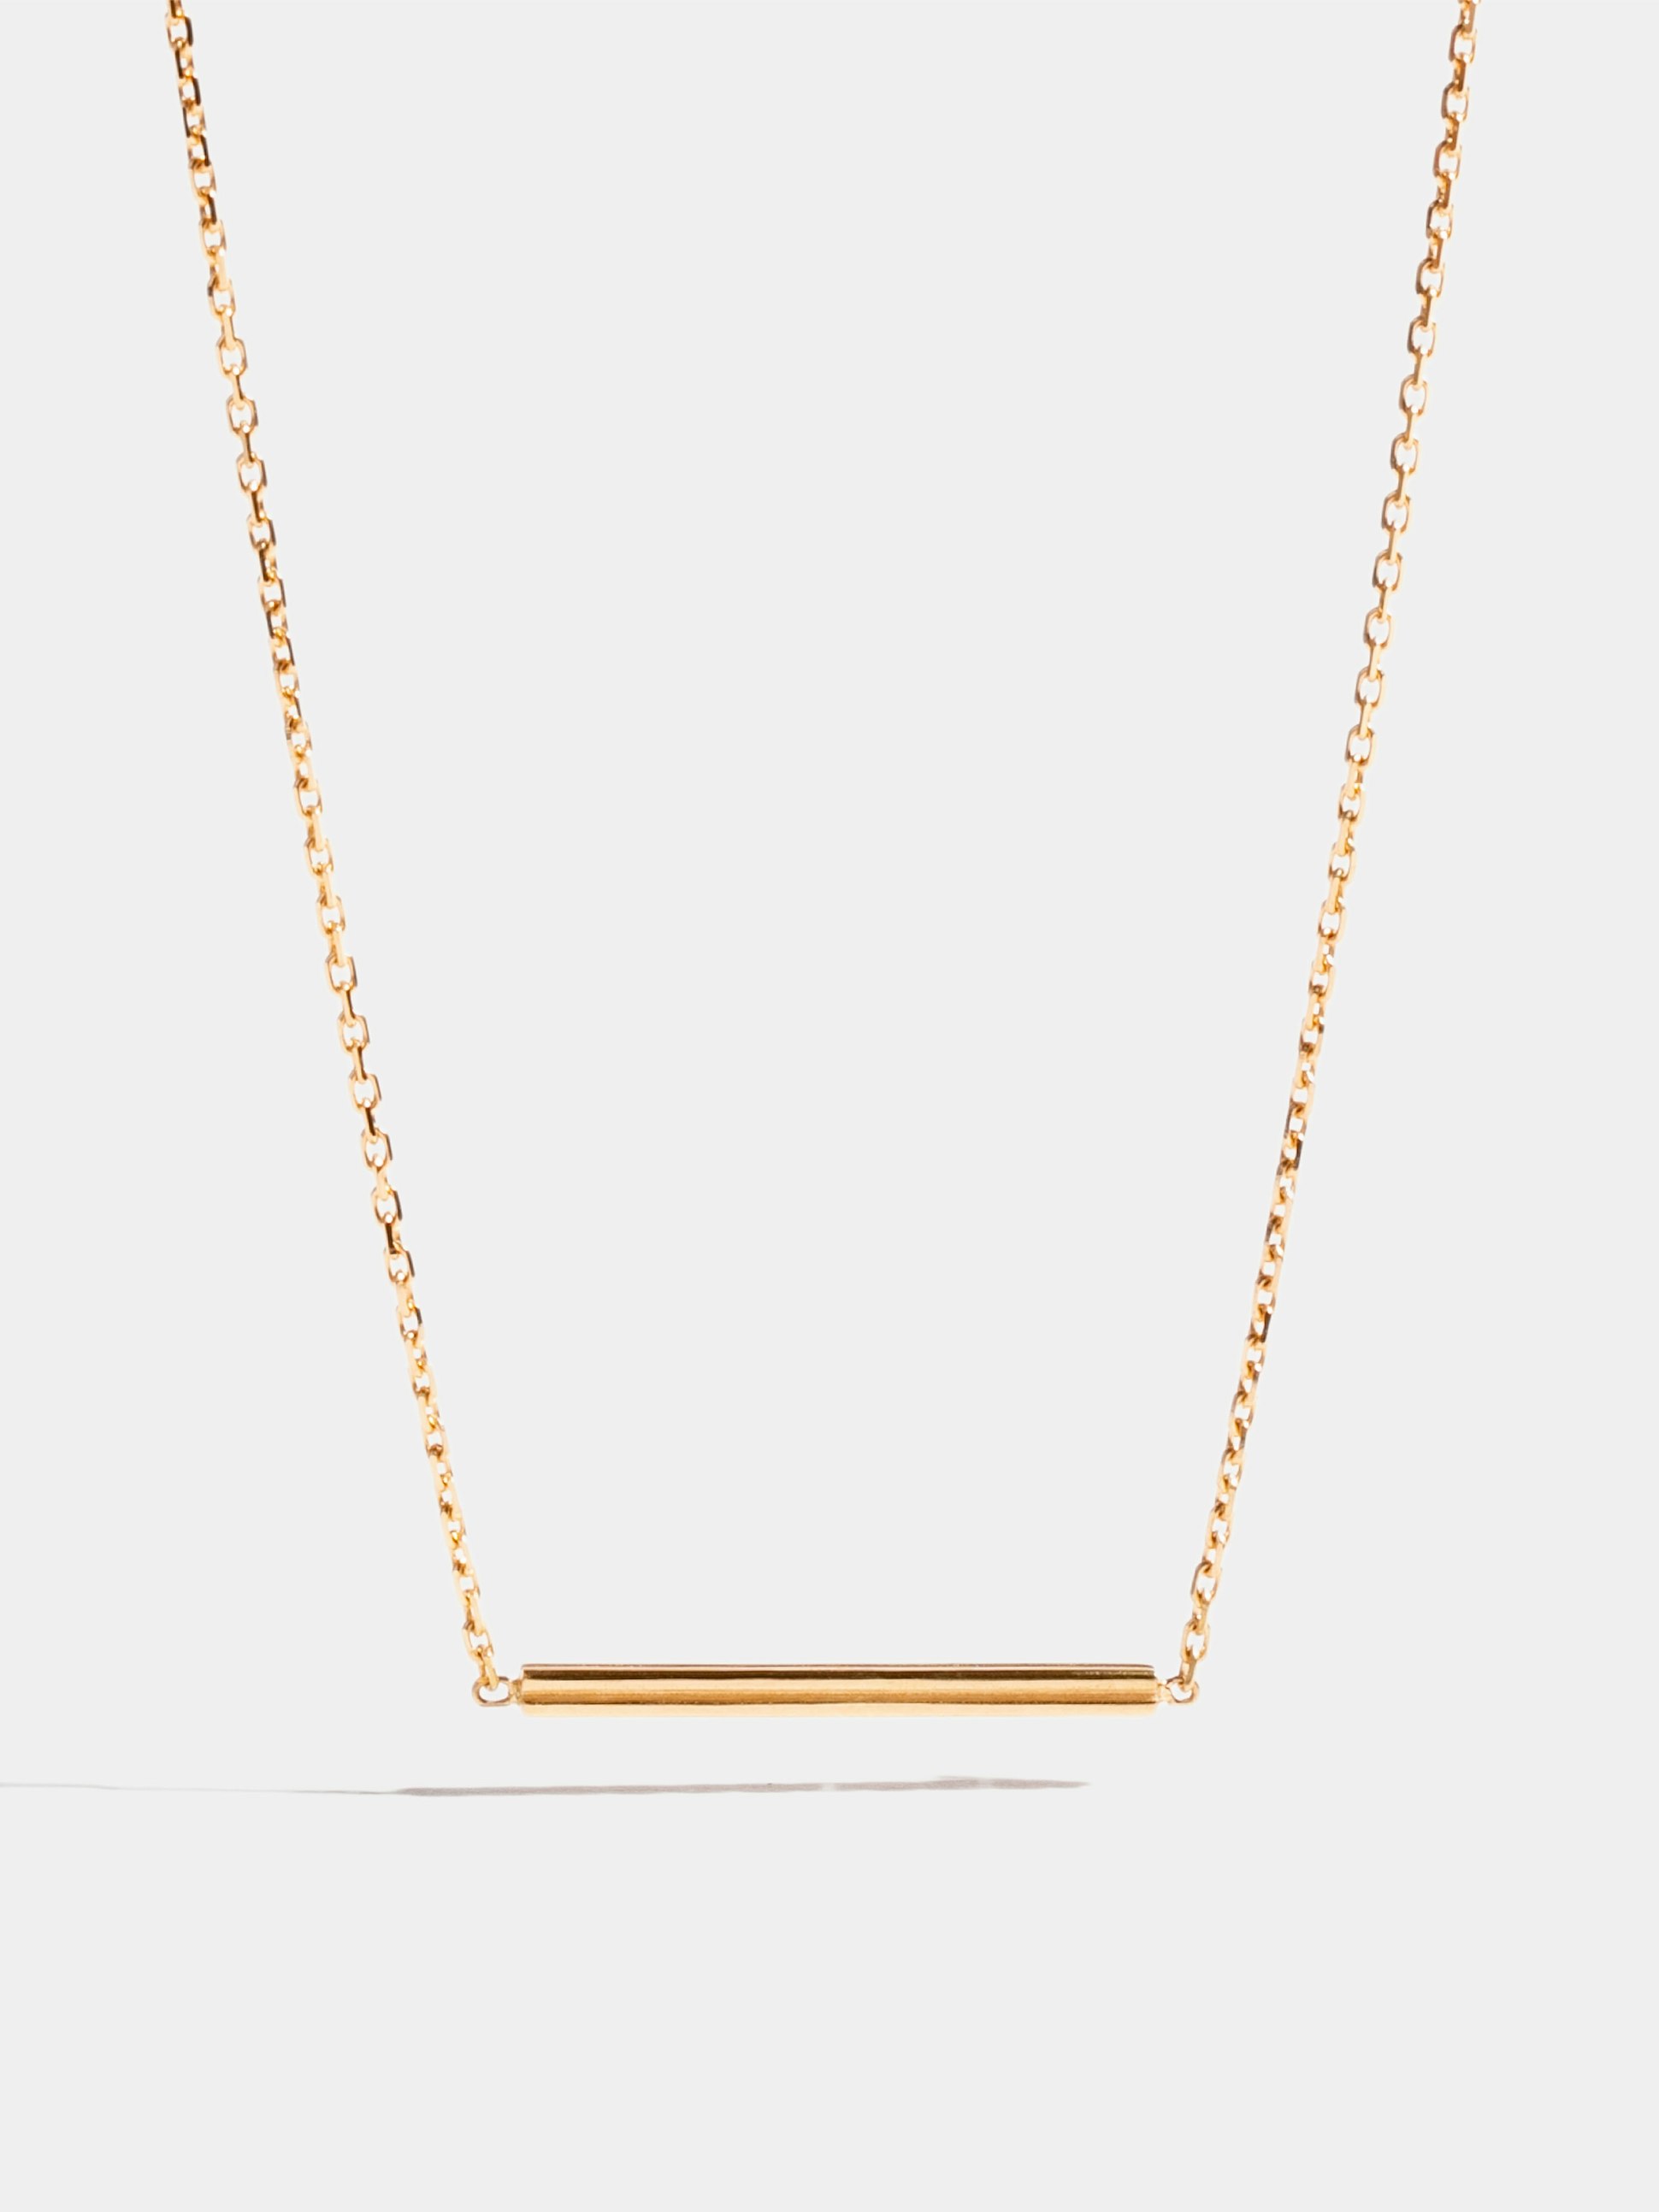 Anagramme "double jonc" motif in yellow gold 18k Fairmined ethical, on 42 cm chain